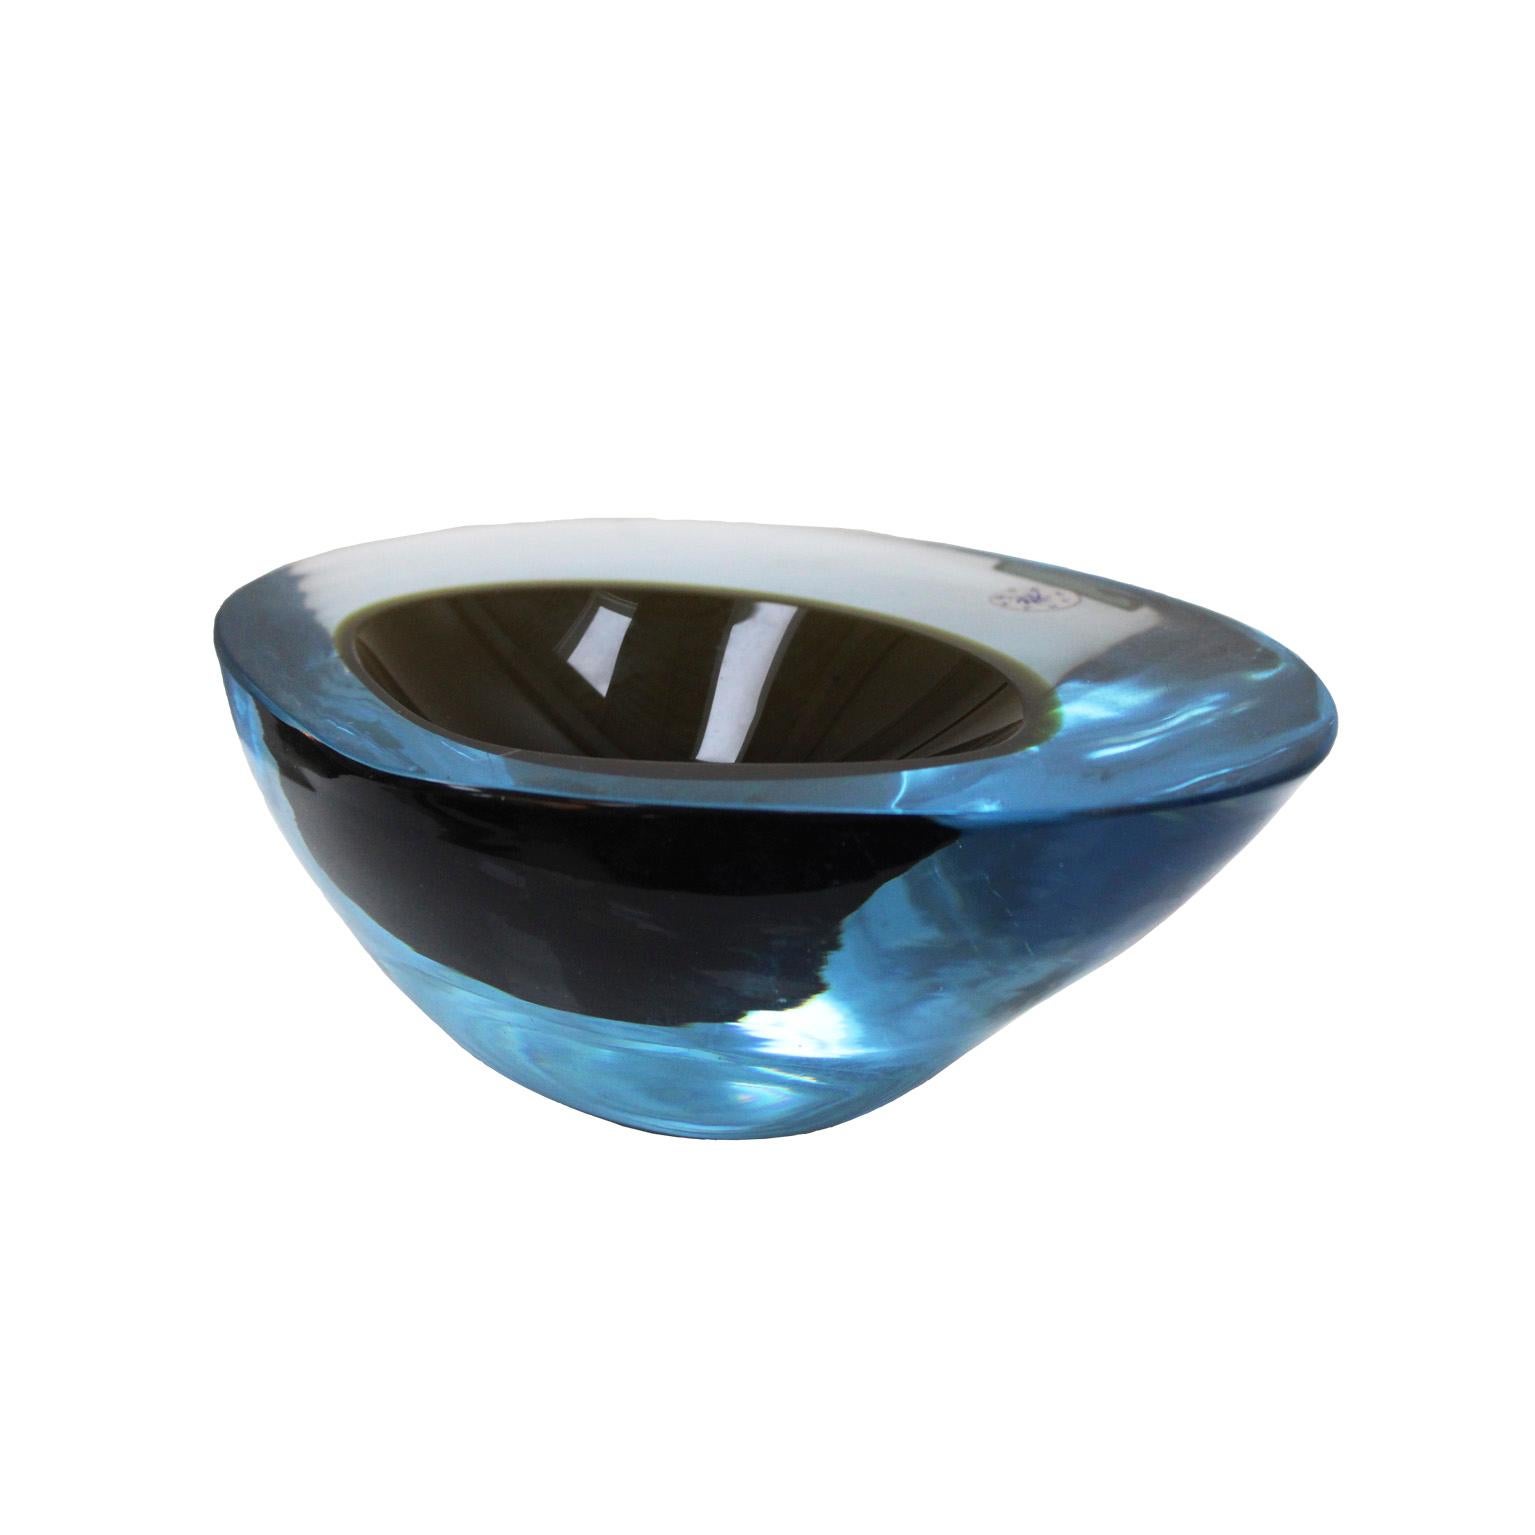 Italian Mid-Century Modern Blue and Black Sommerso Murano Glass Vase by Flavio Poli 1950 For Sale